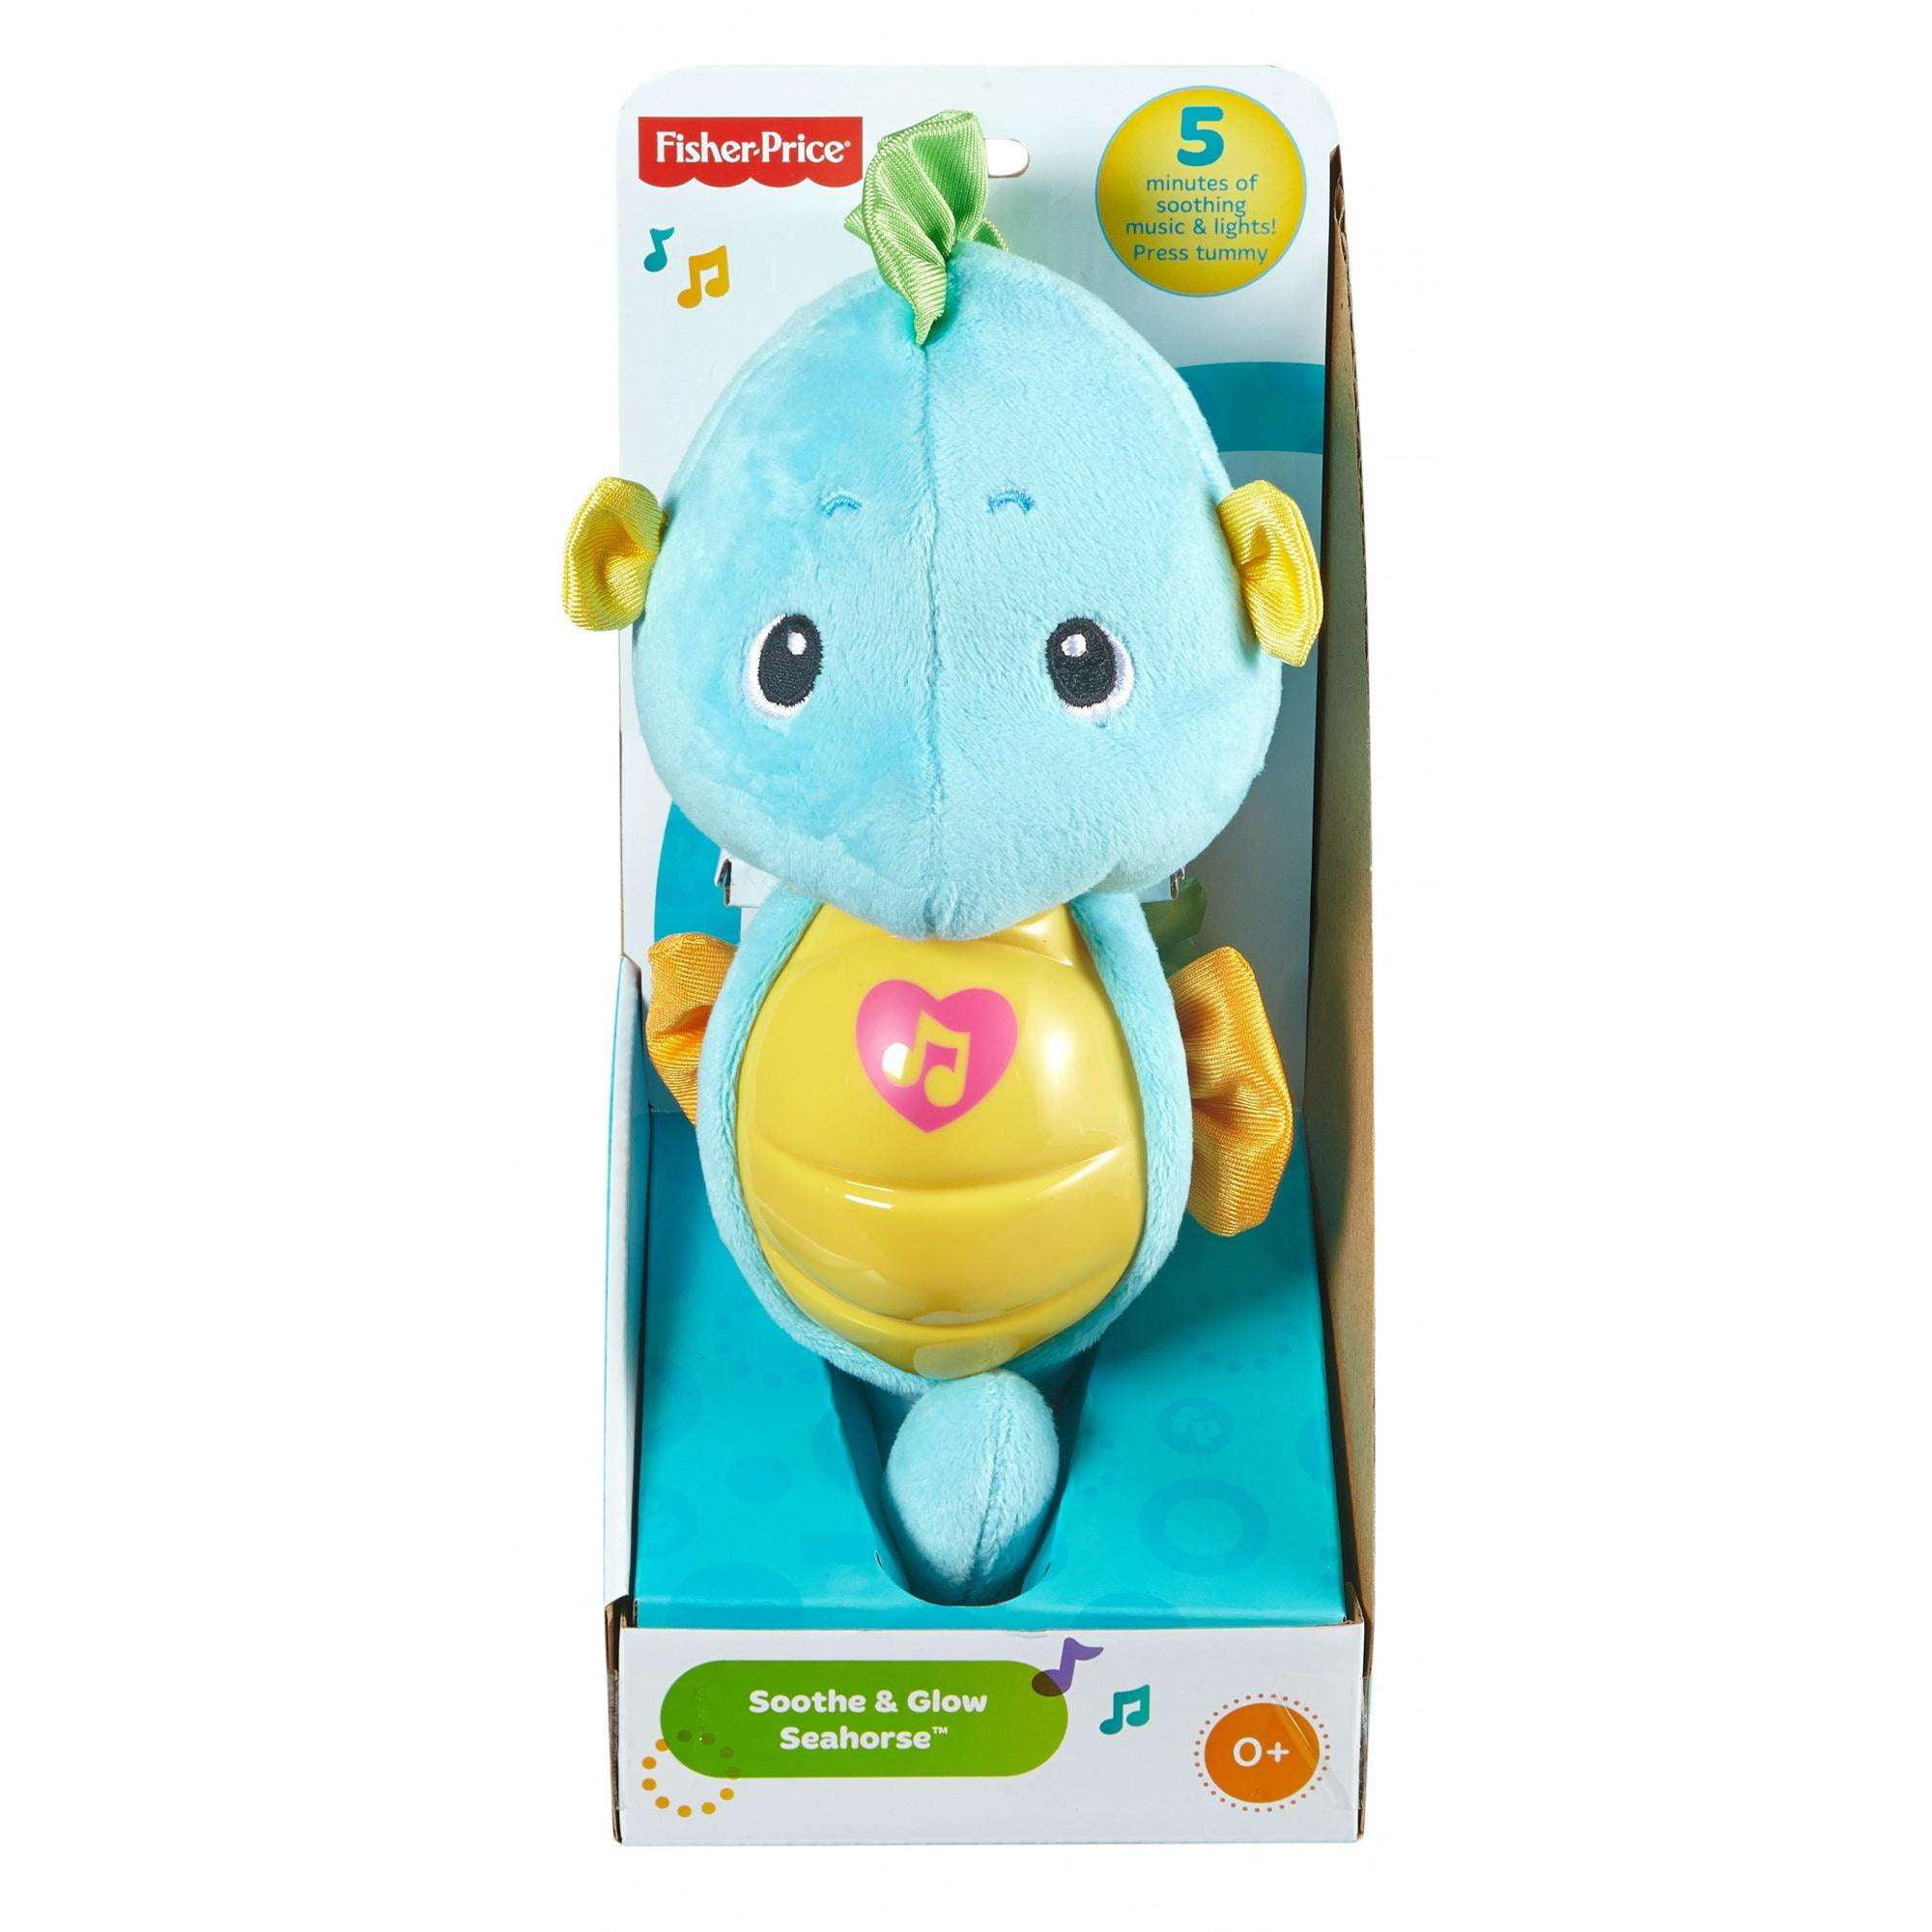 Fisher-Price Soothe and Glow Seahorse Blue